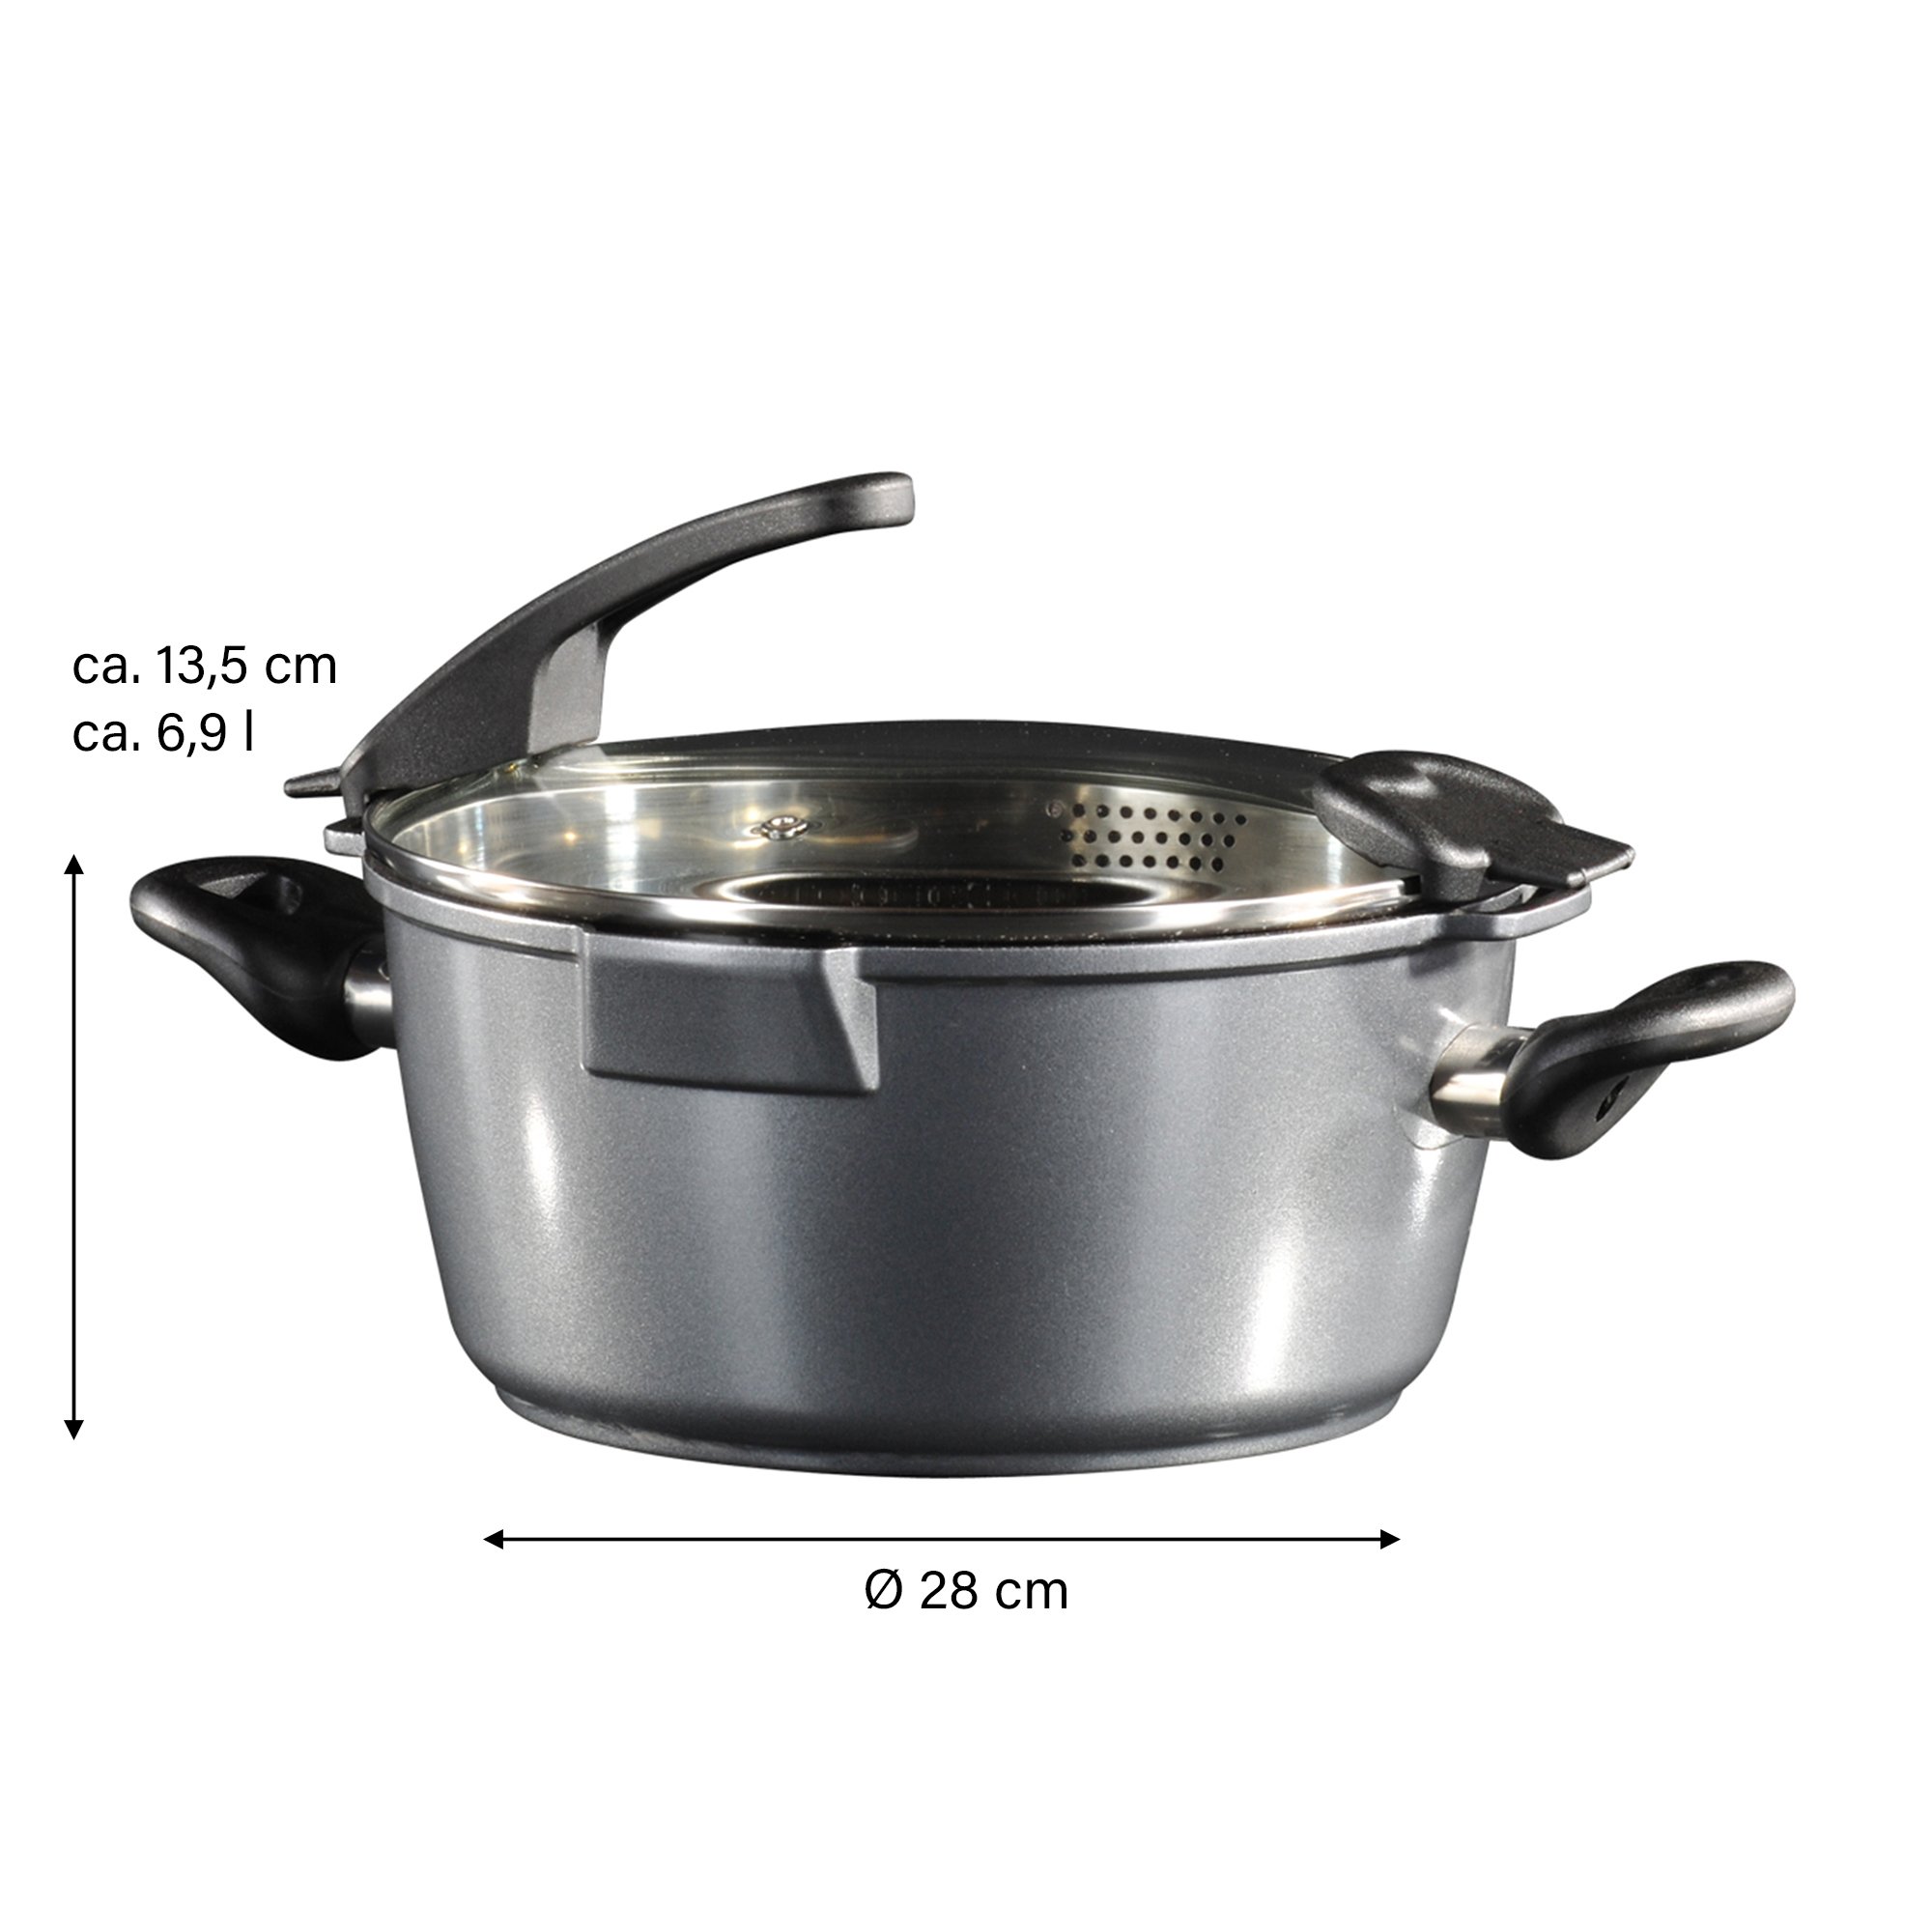 STONELINE® FUTURE frying pan 28 cm, with sieve glass lid, non-stick coating, induction and oven-safe